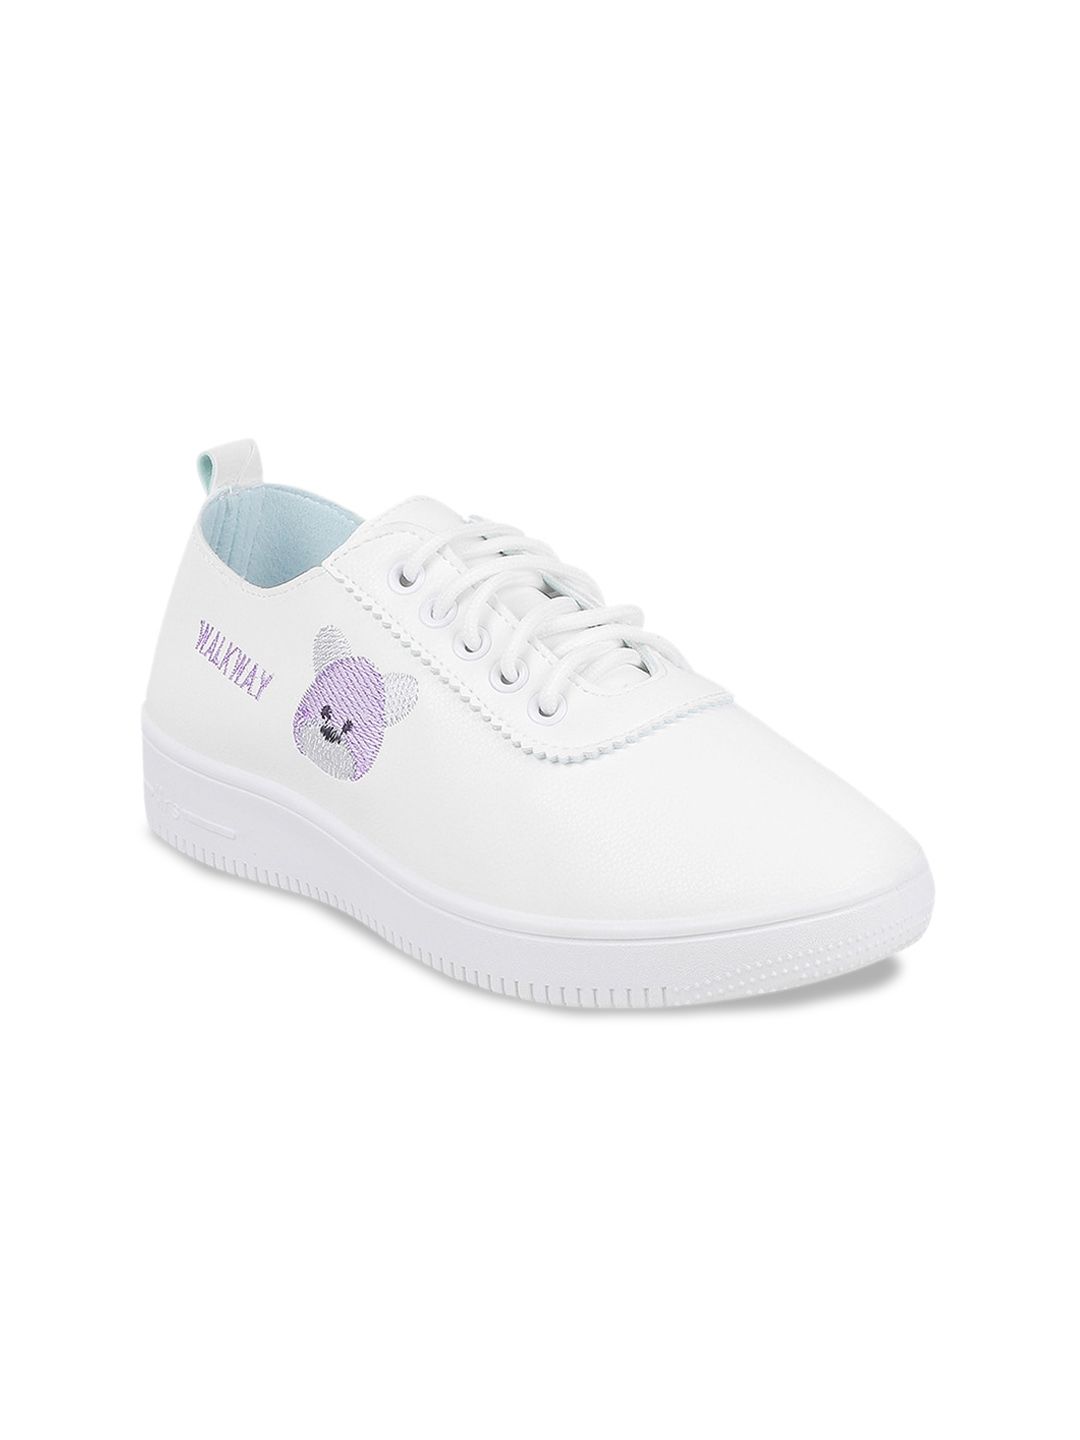 WALKWAY by Metro Women White Printed Synthetic Sneakers Price in India